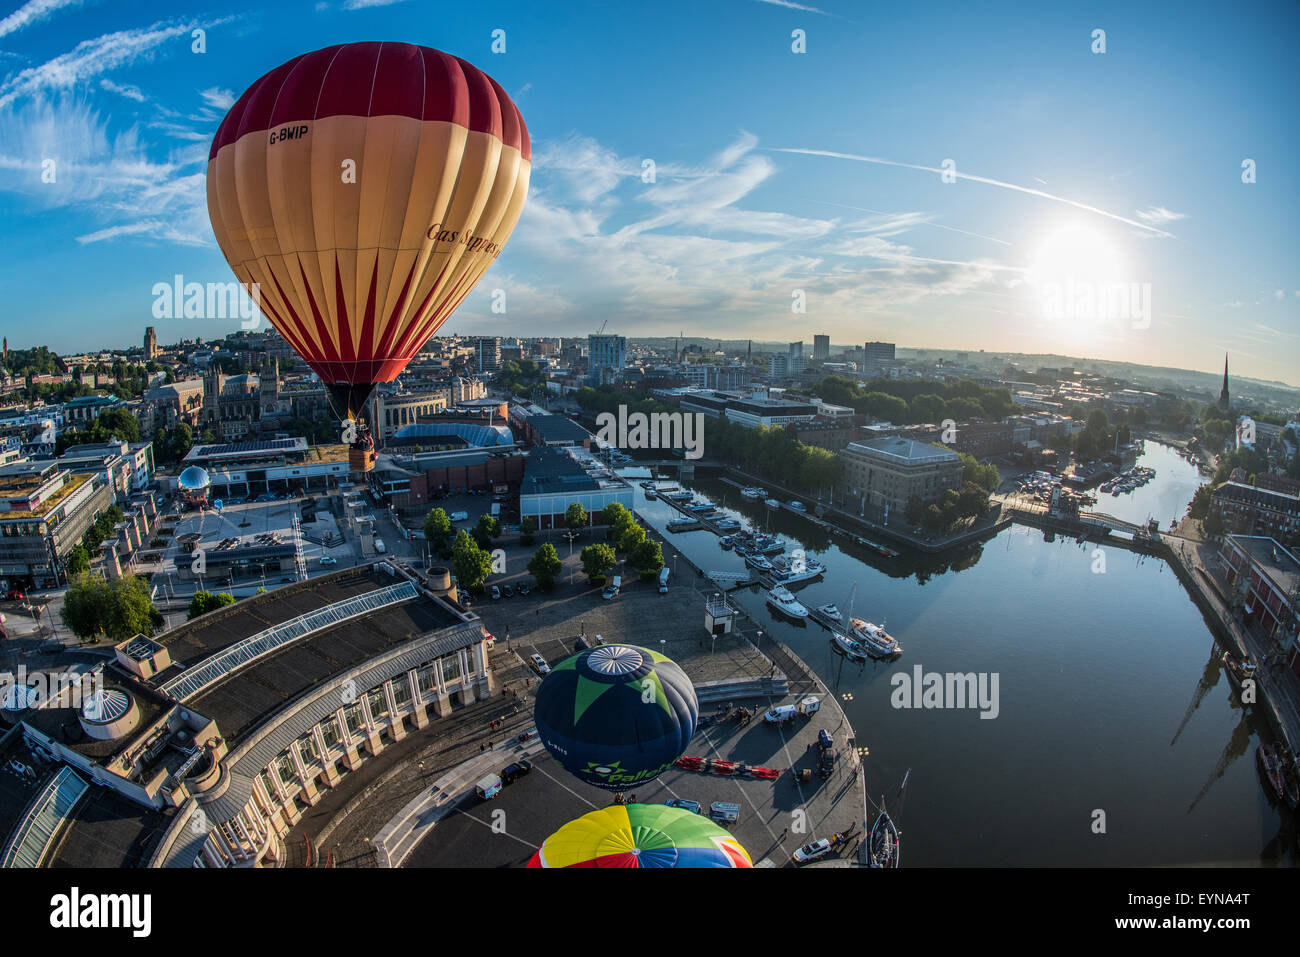 Bristol, UK. 31st July, 2015. Hot air balloons take to the skies over Bristol ahead of the 37th International Balloon Fiesta. Stock Photo